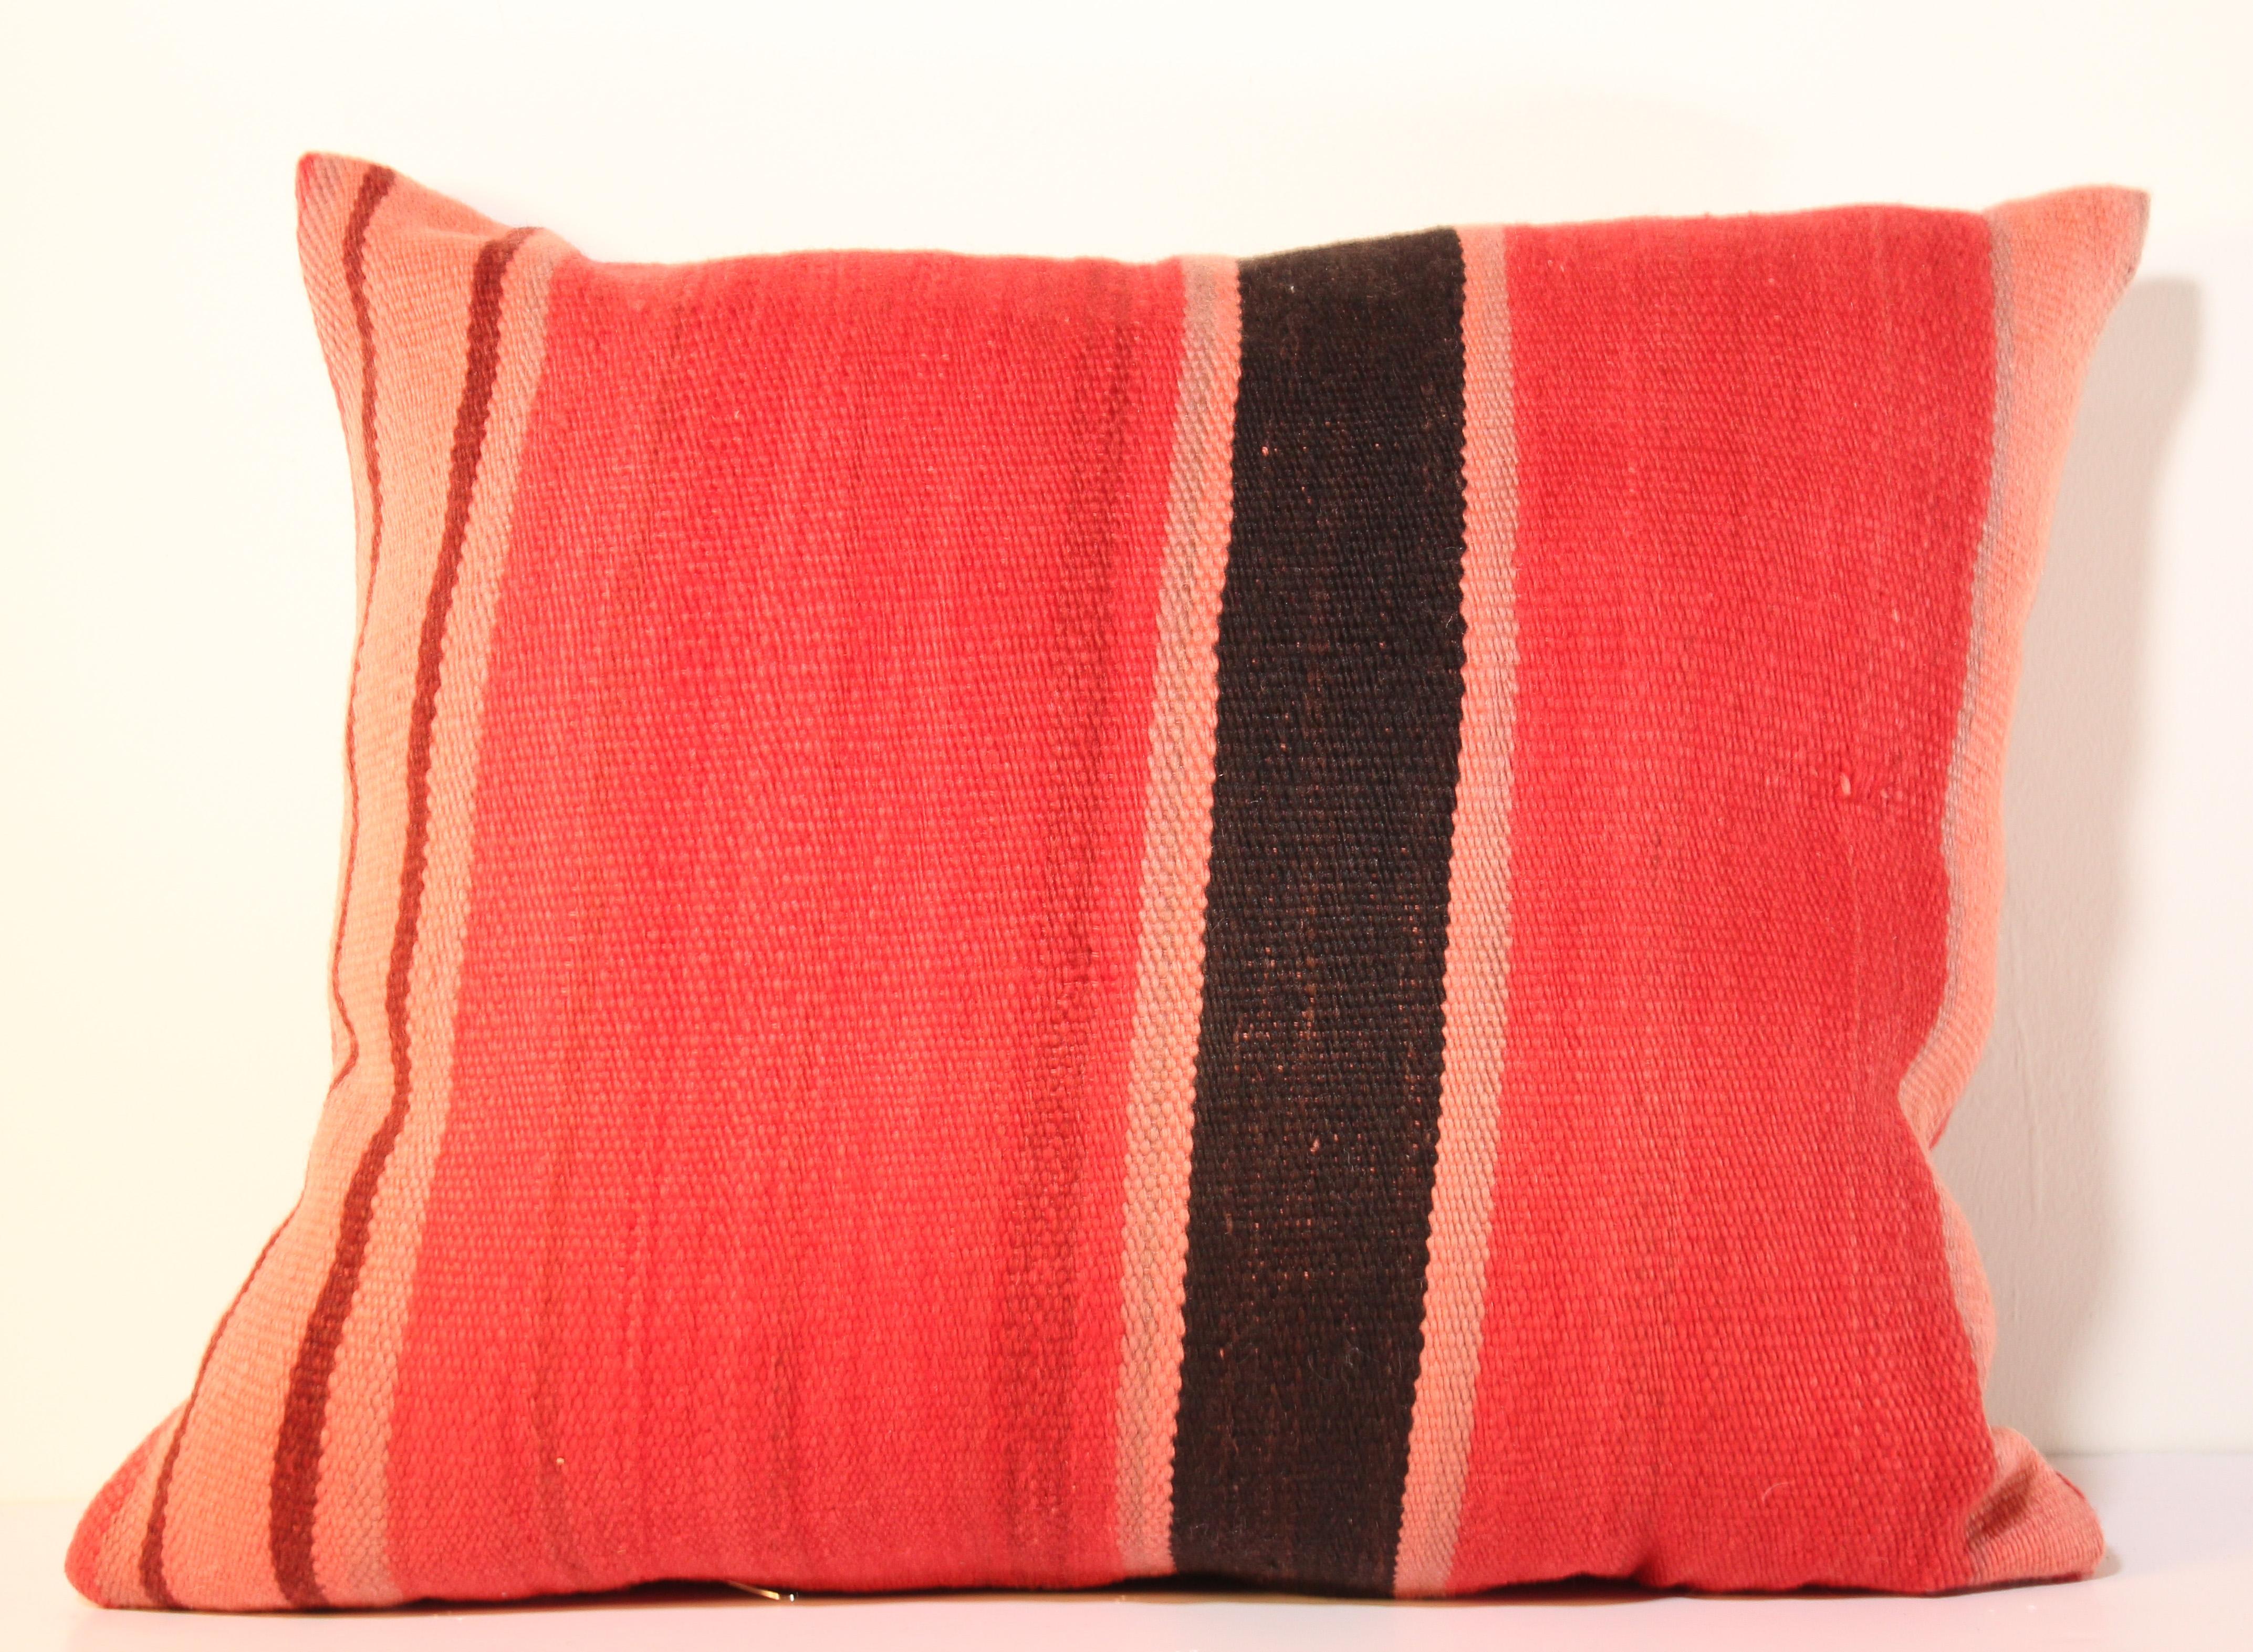 Custom Berber pillow cut from a vintage handwoven wool Moroccan tribal flat-weave Kilim tribal rug.
Handwoven by the Berber women from the Atlas Mountains of Morocco. 
Great handcrafted textile with earth tone colors large stripes in purple,